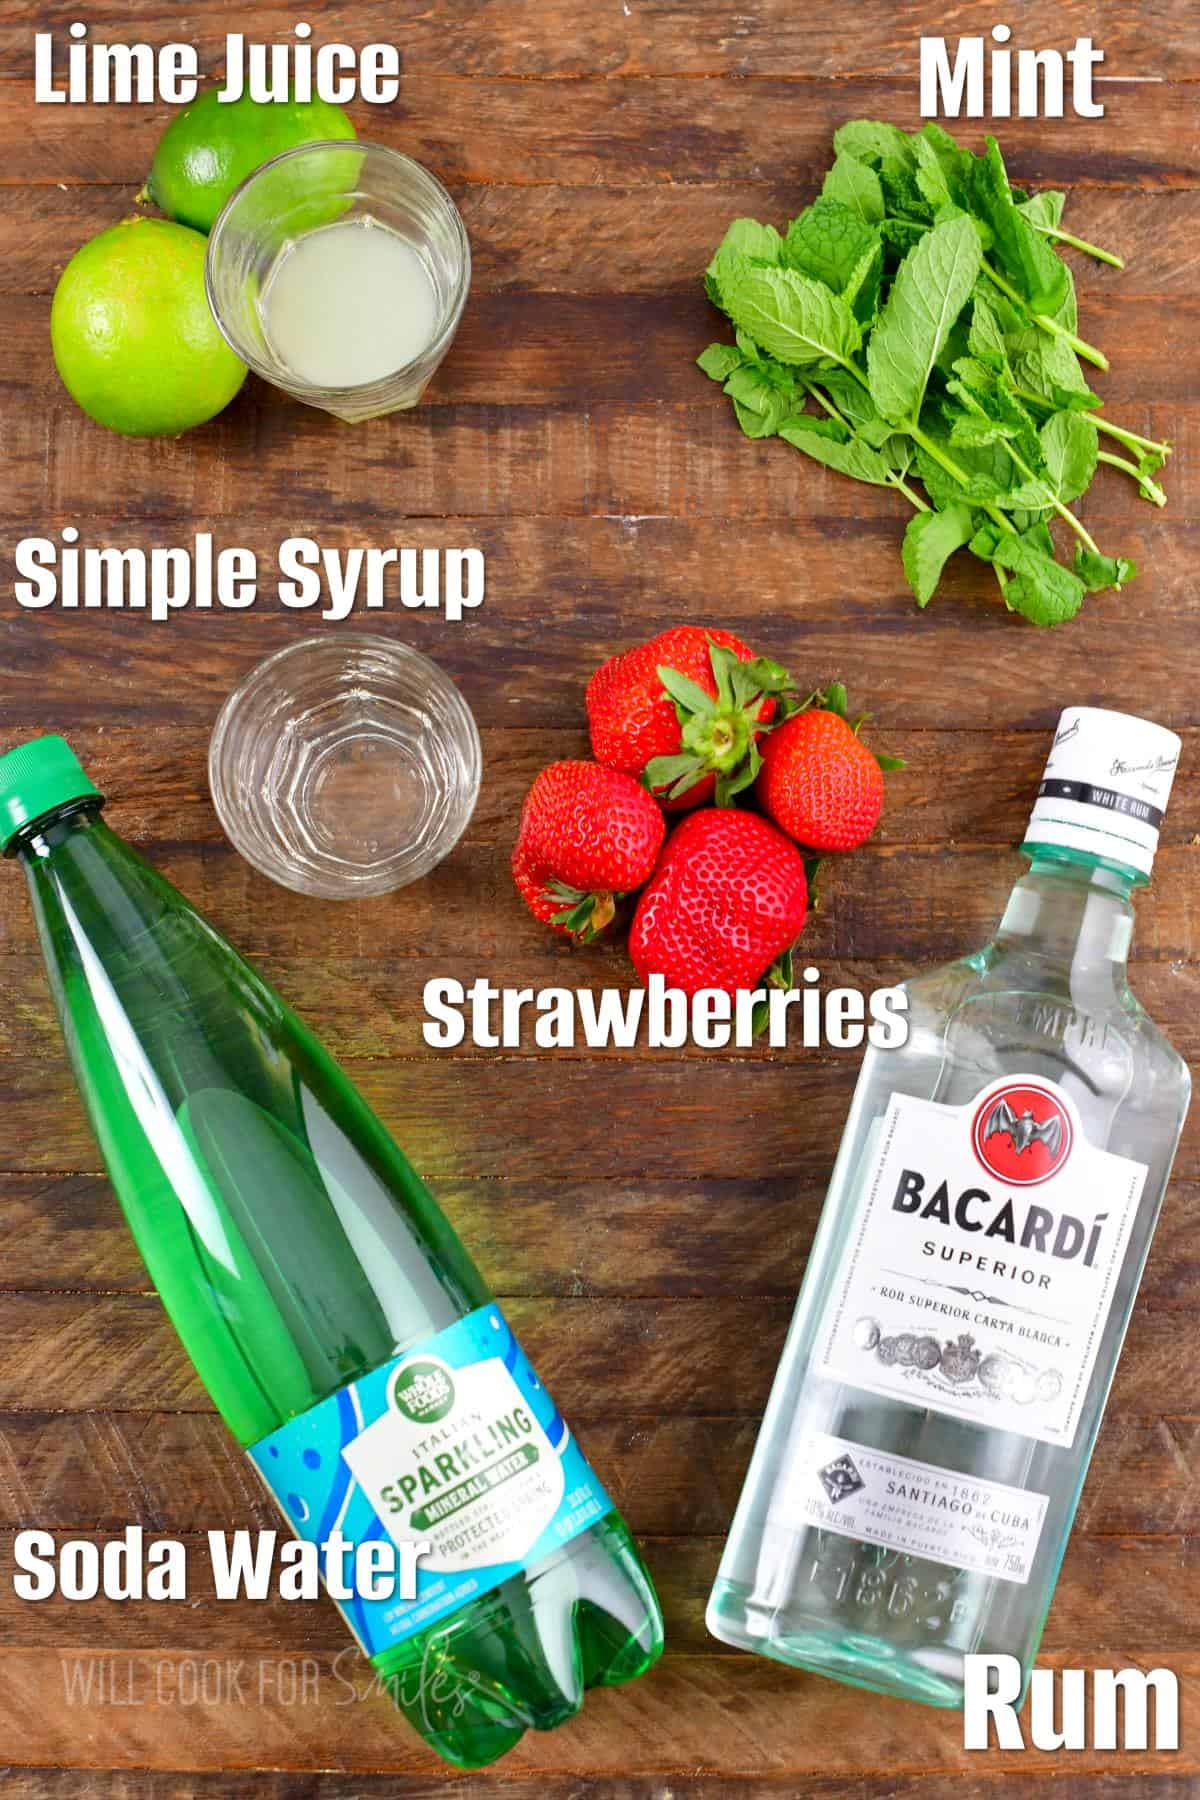 The ingredients for strawberry mojito are placed on a wooden surface. 